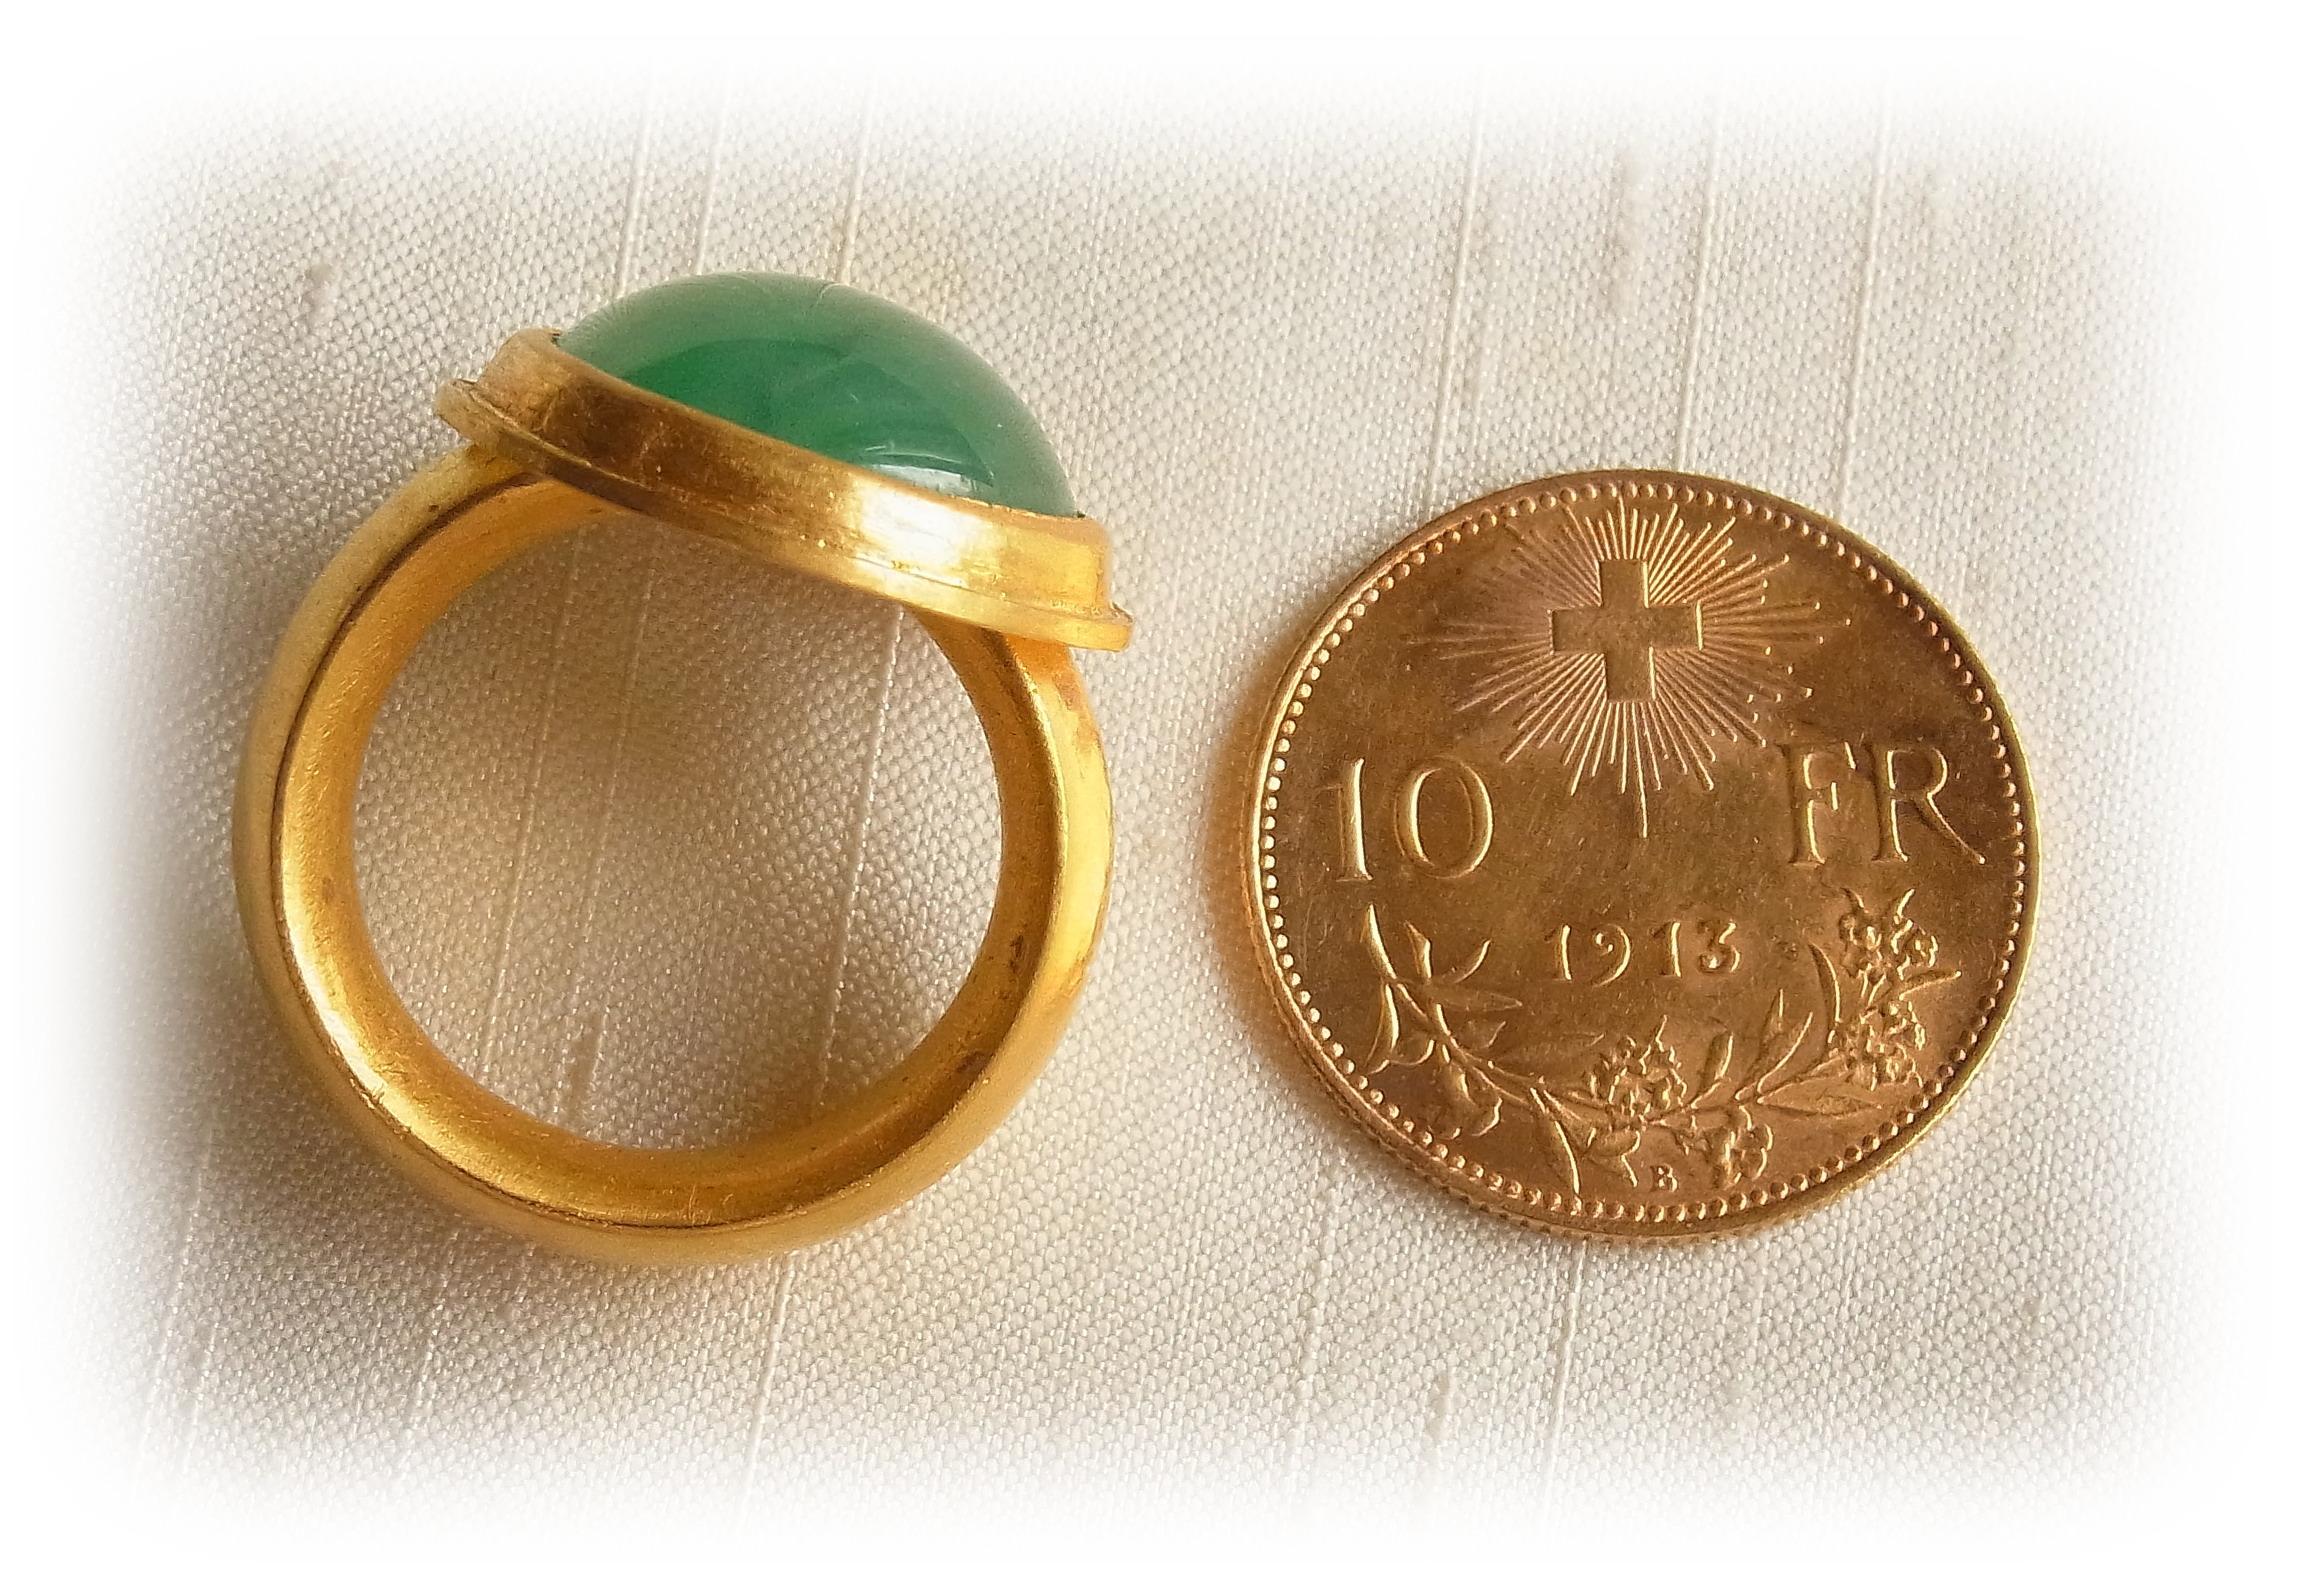 Deep green Jadeite Gold ring (Side), Swiss 10 Fr Gold coin issued in 1913